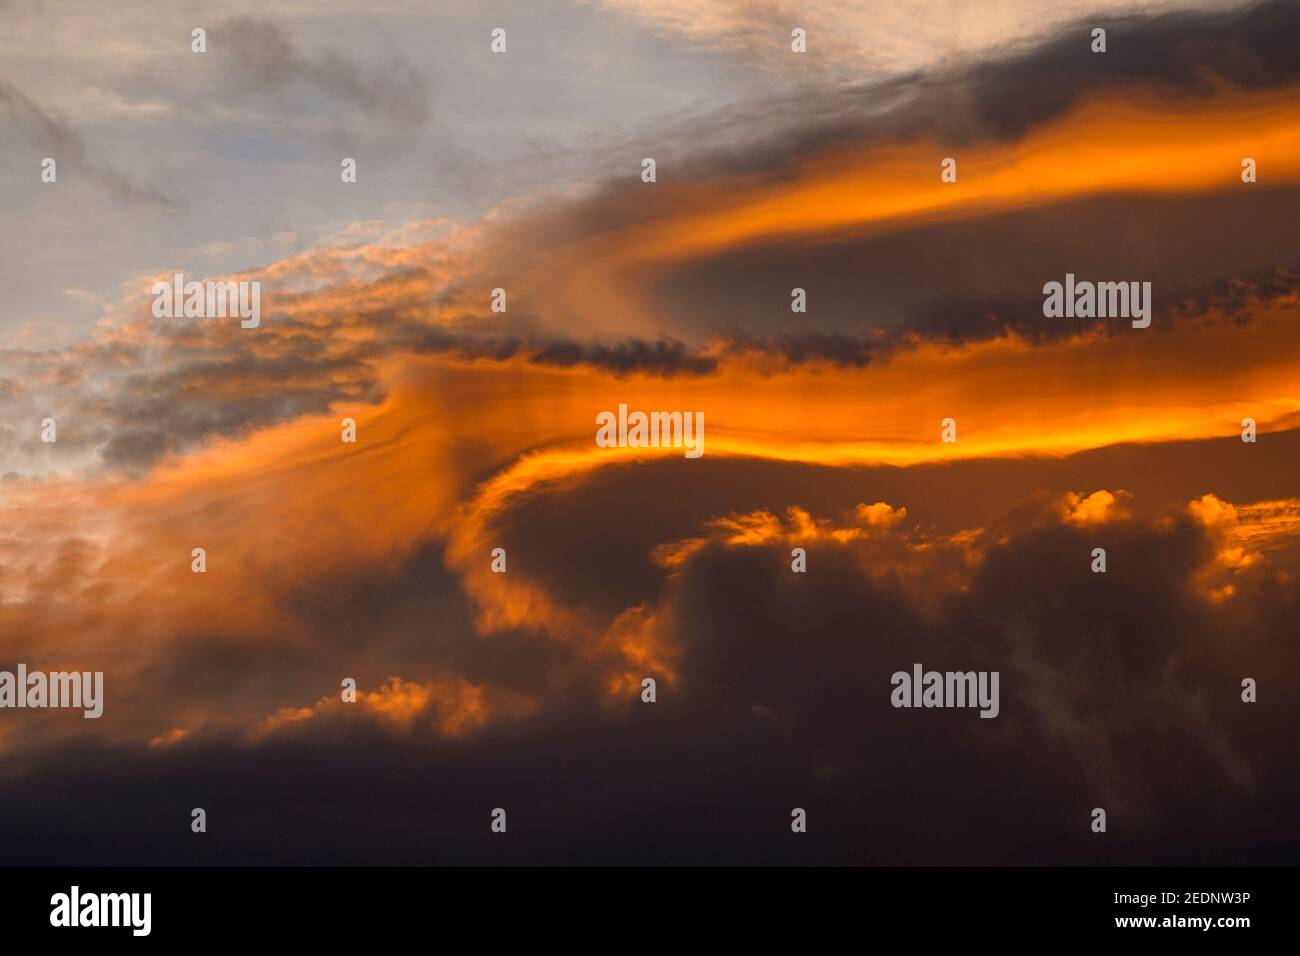 Detail of a dramatic sunset sky, Southern Spain Stock Photo